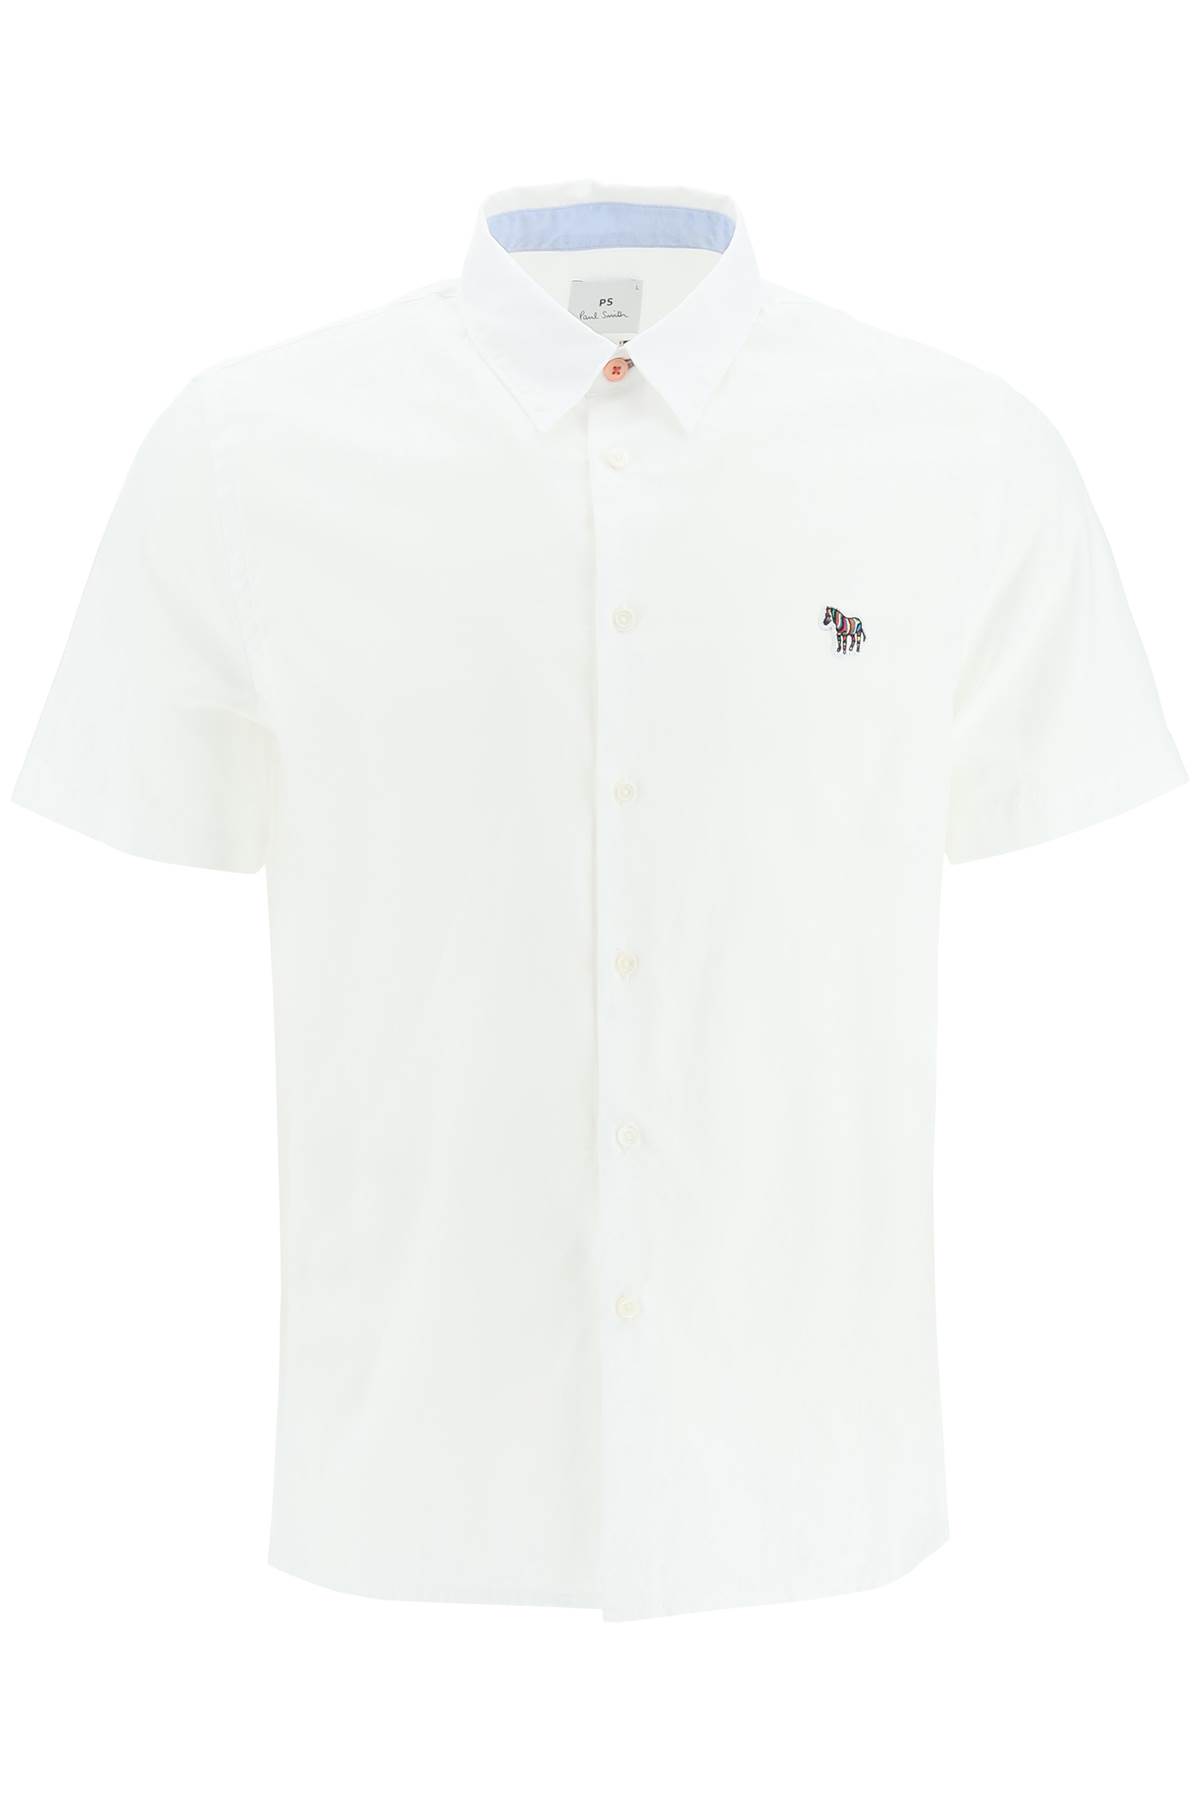 PS BY PAUL SMITH SHORT SLEEVE SHIRT IN ORGANIC COTTON